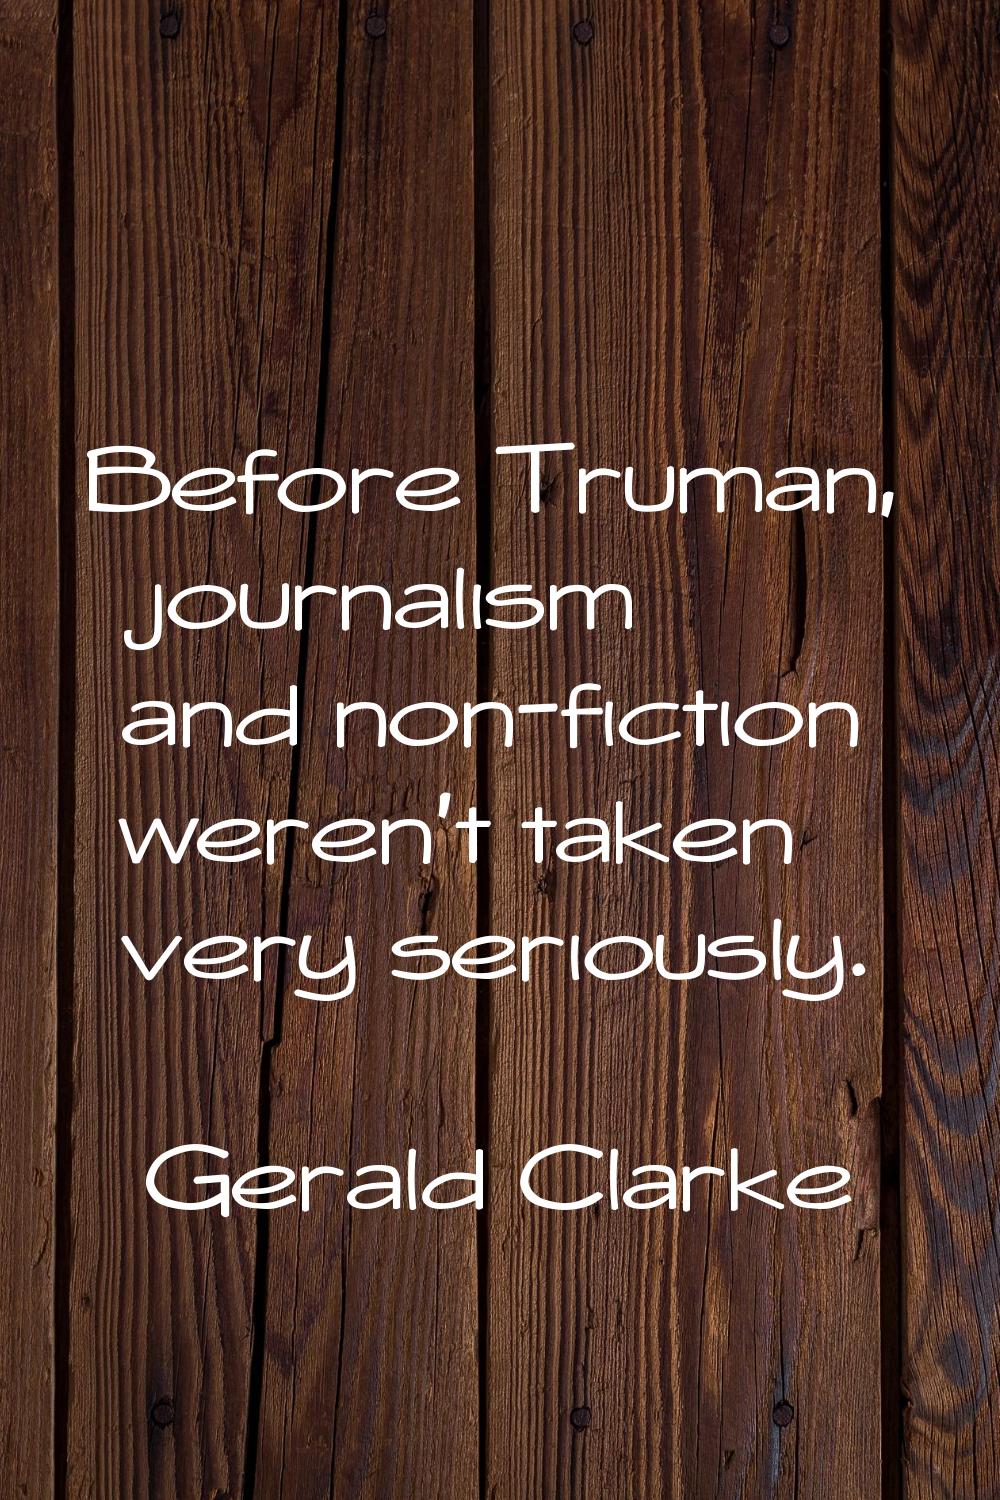 Before Truman, journalism and non-fiction weren't taken very seriously.